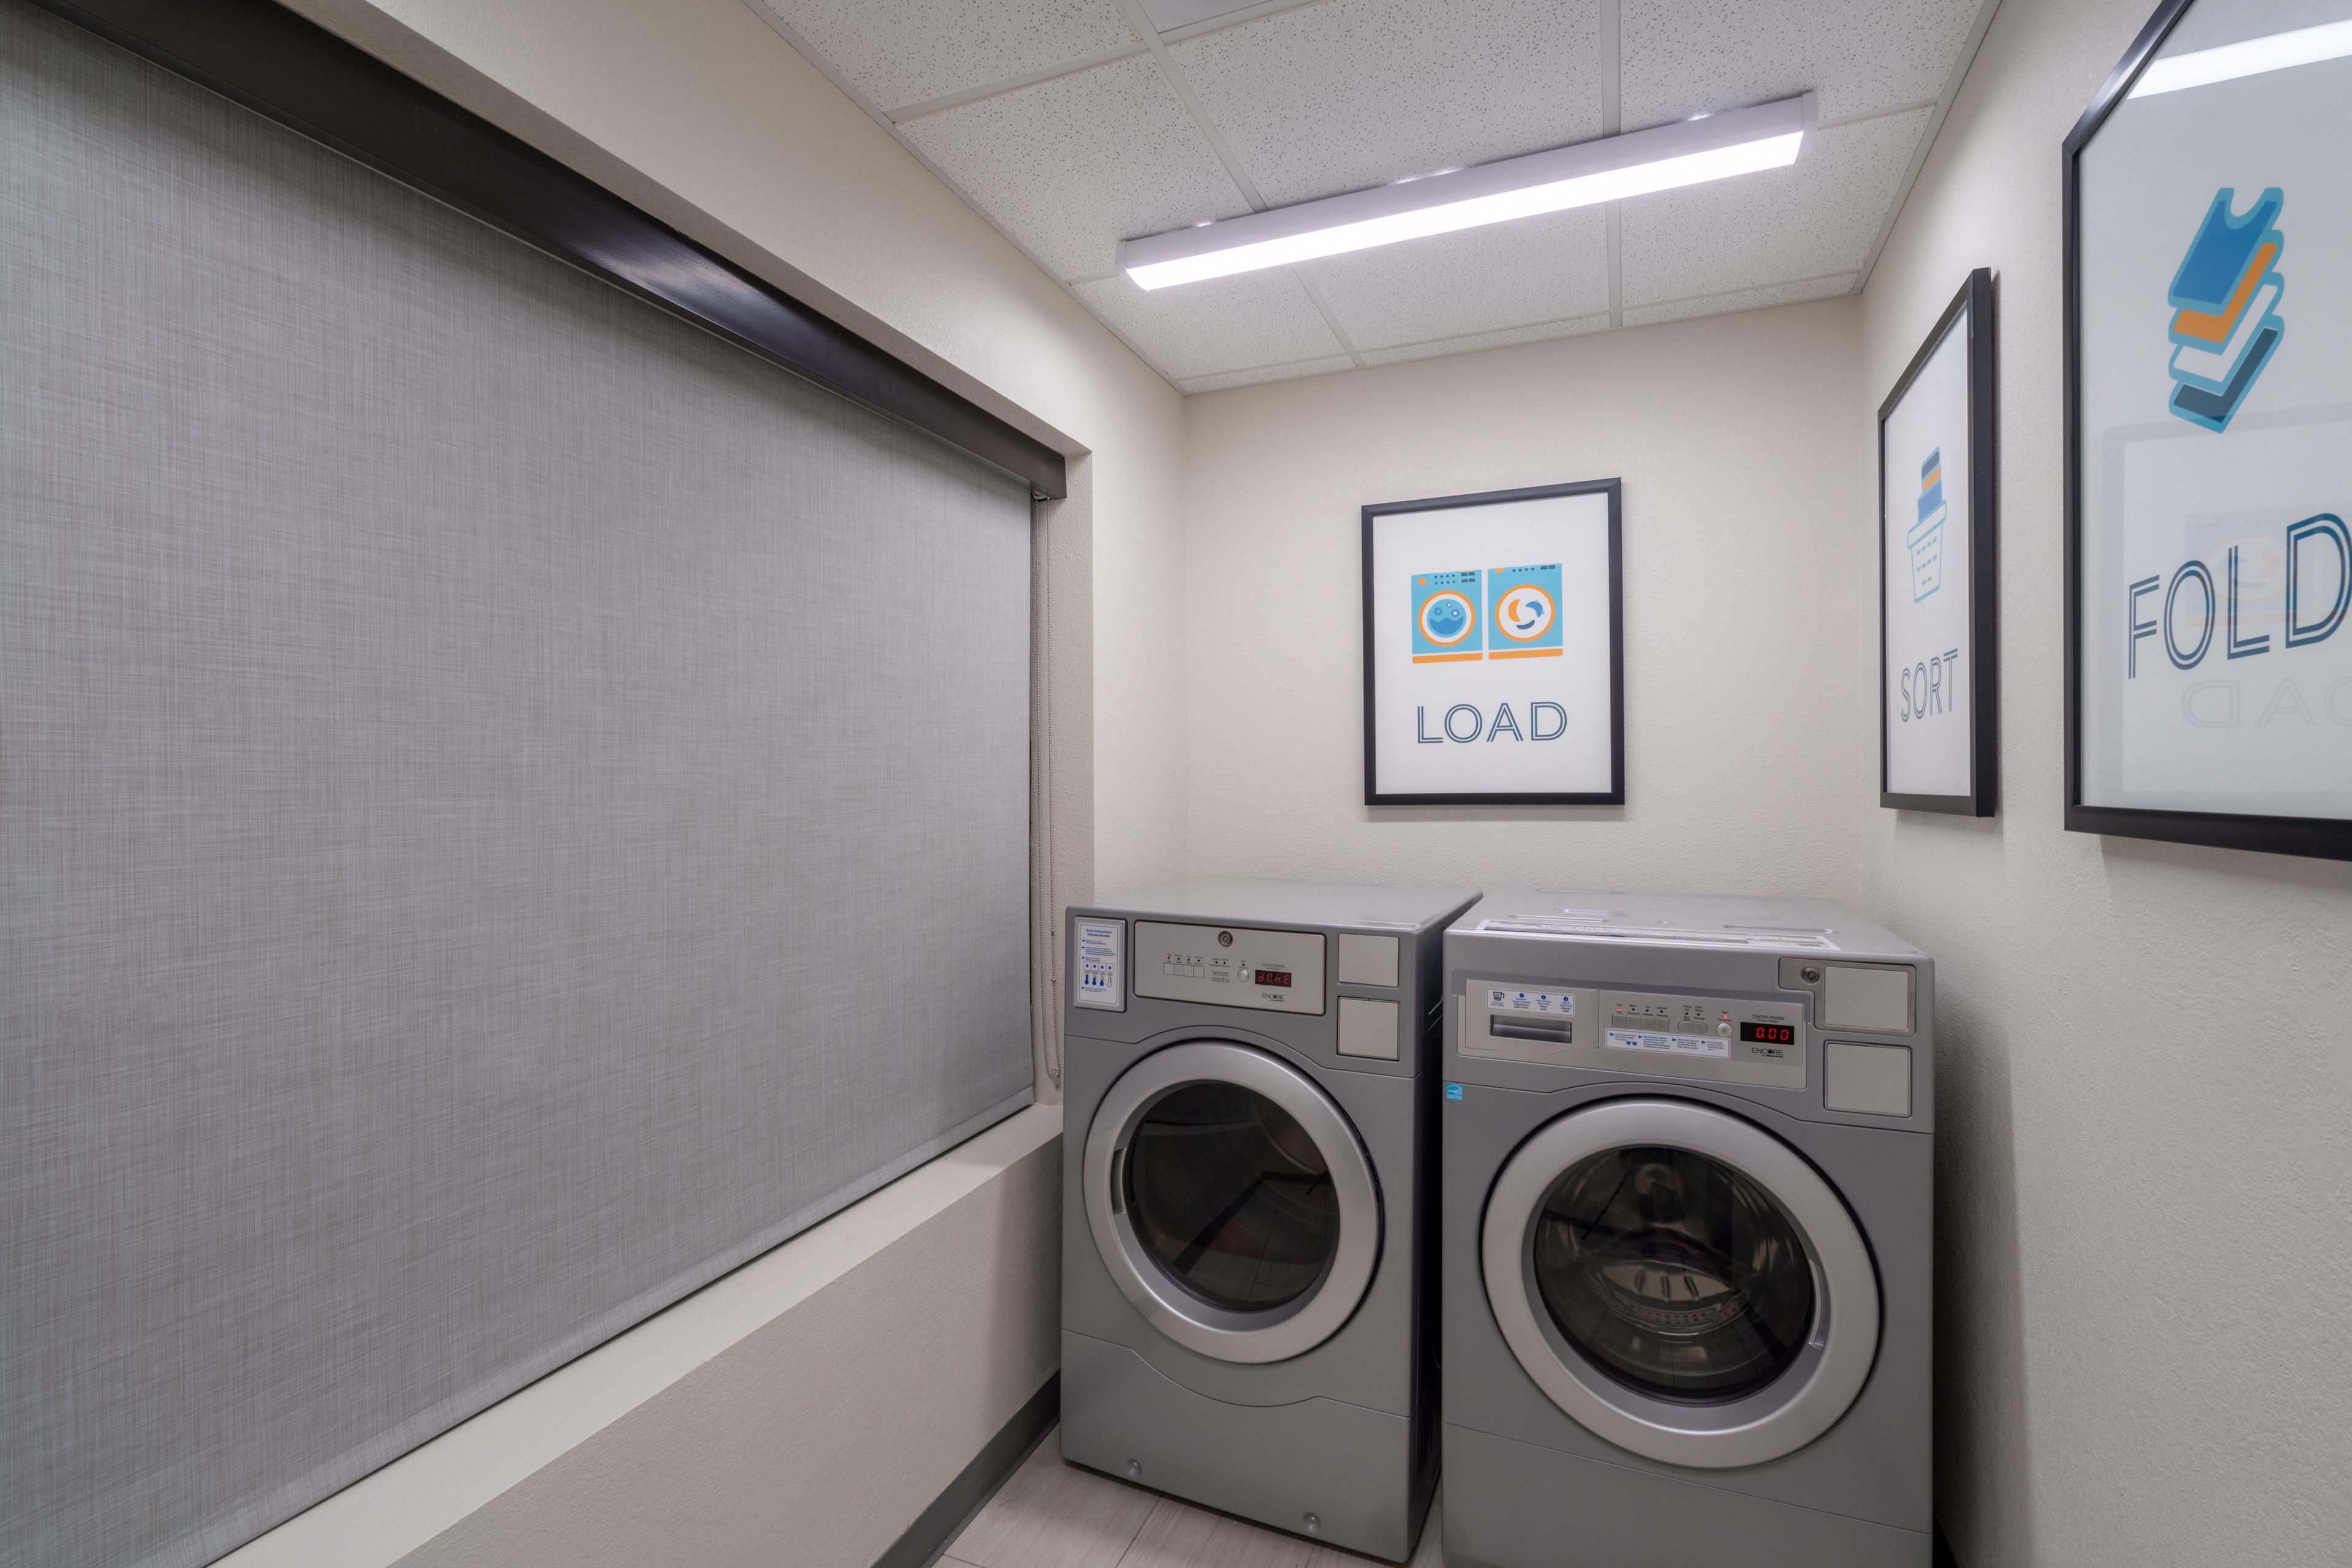 Should you need to do laundry during your extended stay, be sure to utilize the hotel's on-site guest coin laundry. We have laundry facilities on 2nd through 6th floor. Quarters and detergent are available at the front desk.  